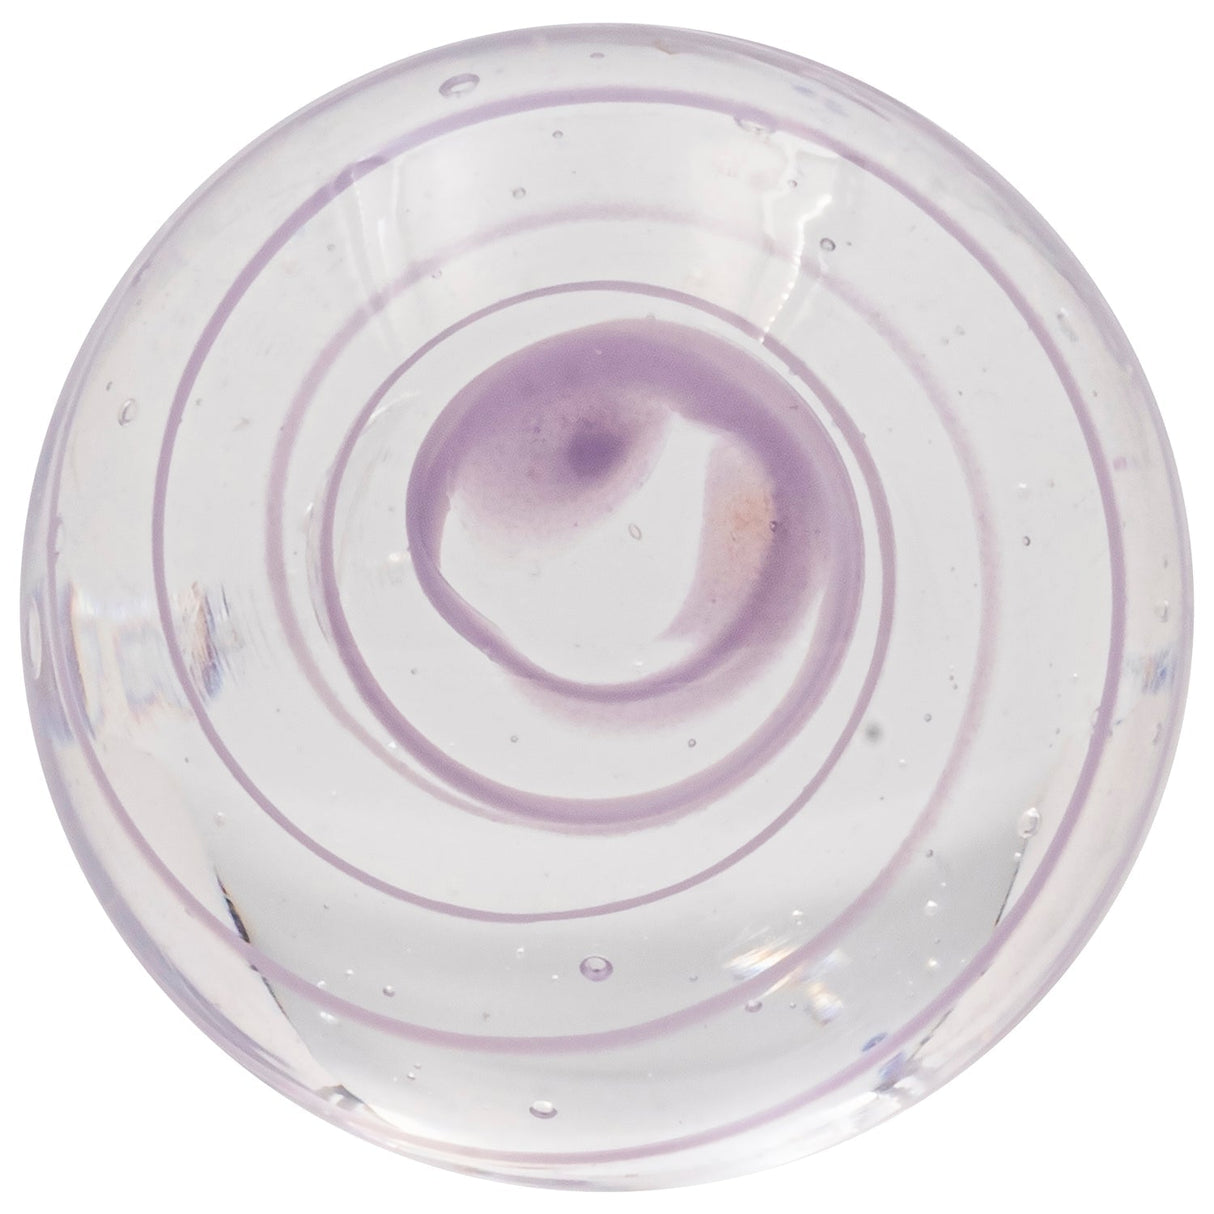 Glasshouse Purple Terp Kit Carb Cap, Top View, Borosilicate Glass with Swirl Design